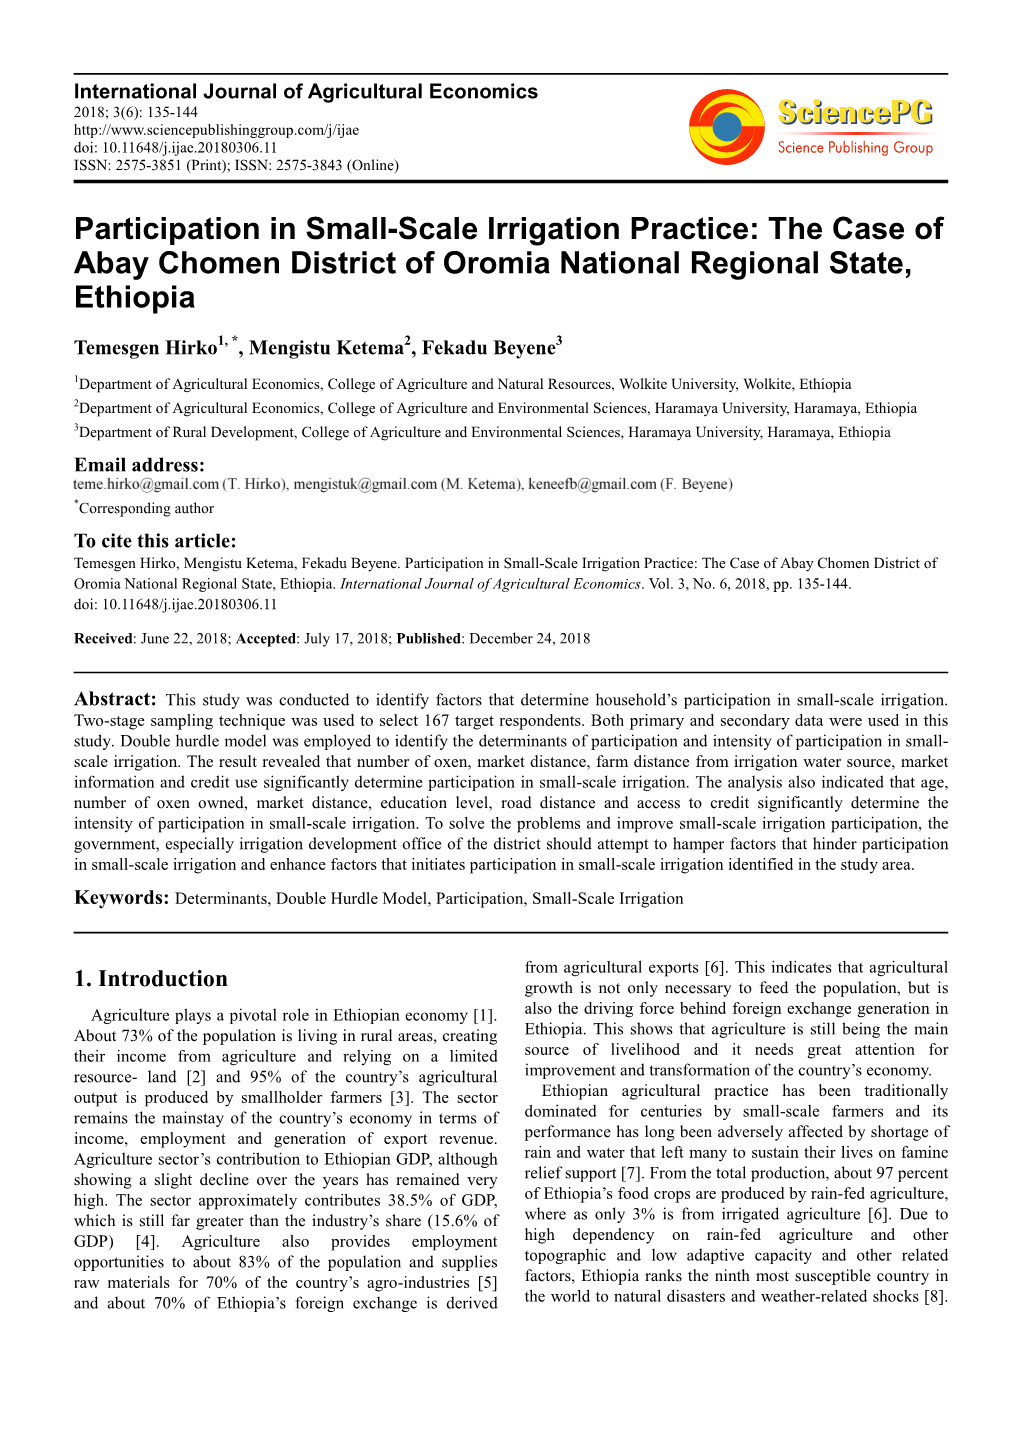 The Case of Abay Chomen District of Oromia National Regional State, Ethiopia